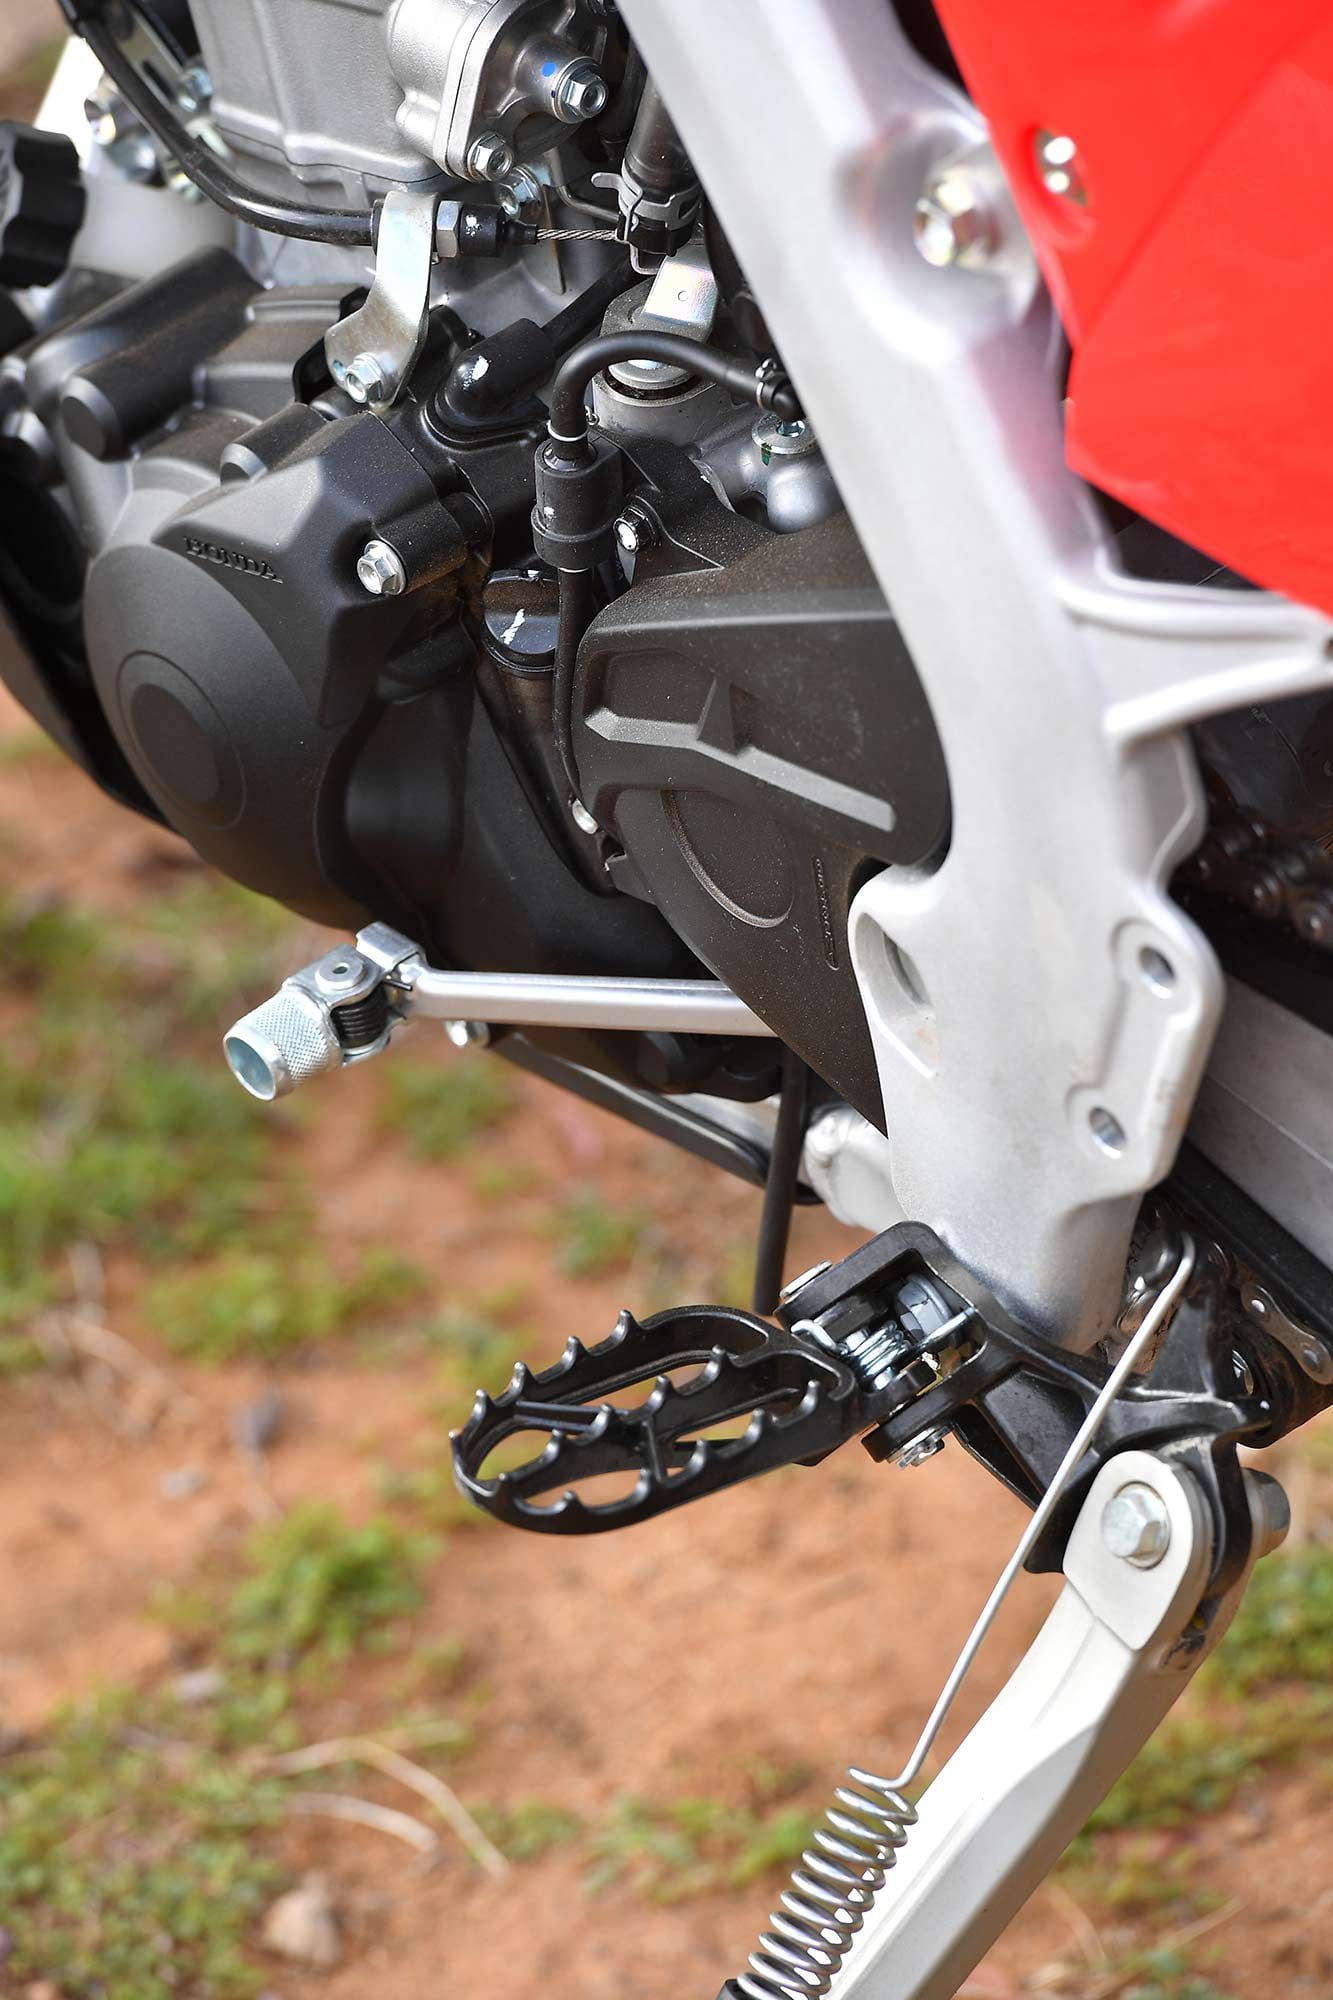 Proper wide footpegs and a tucked-in kickstand assembly.